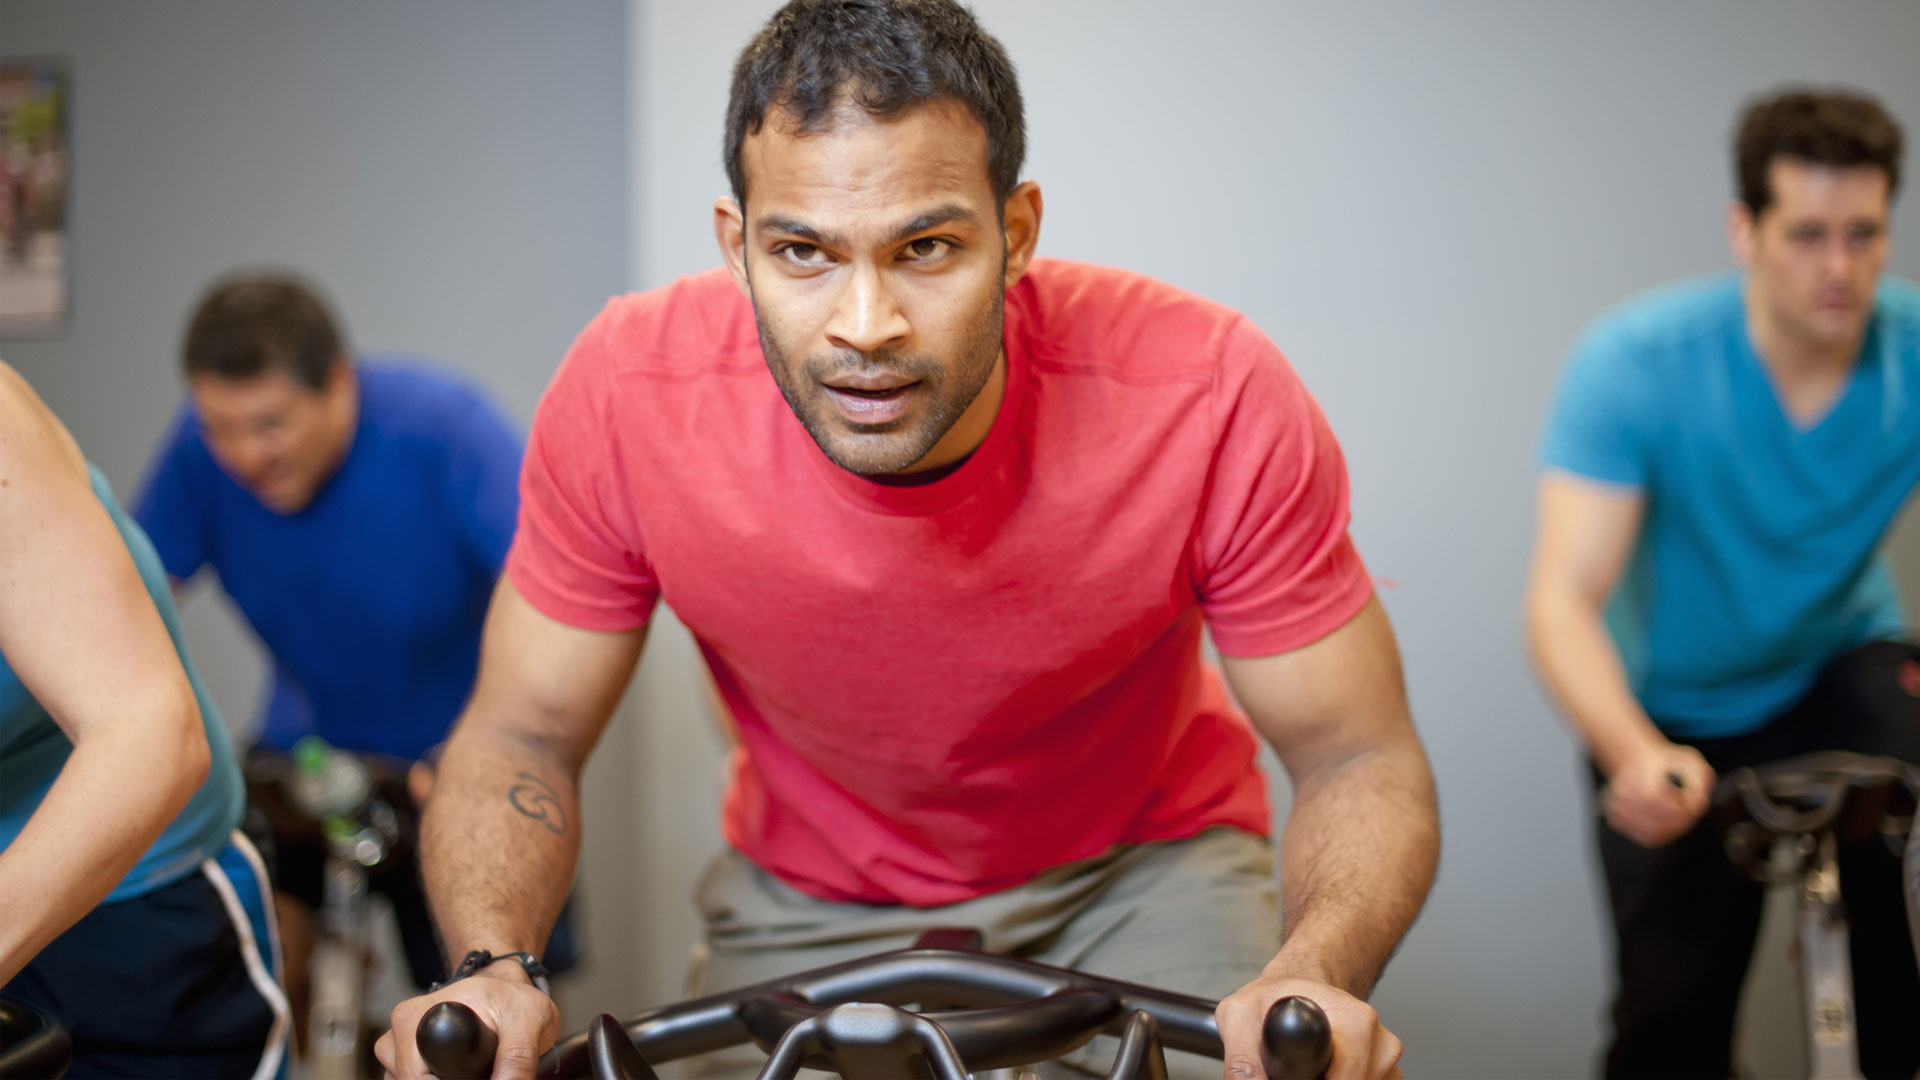 How to lose weight using exercise bike: Image shows man on exercise bike